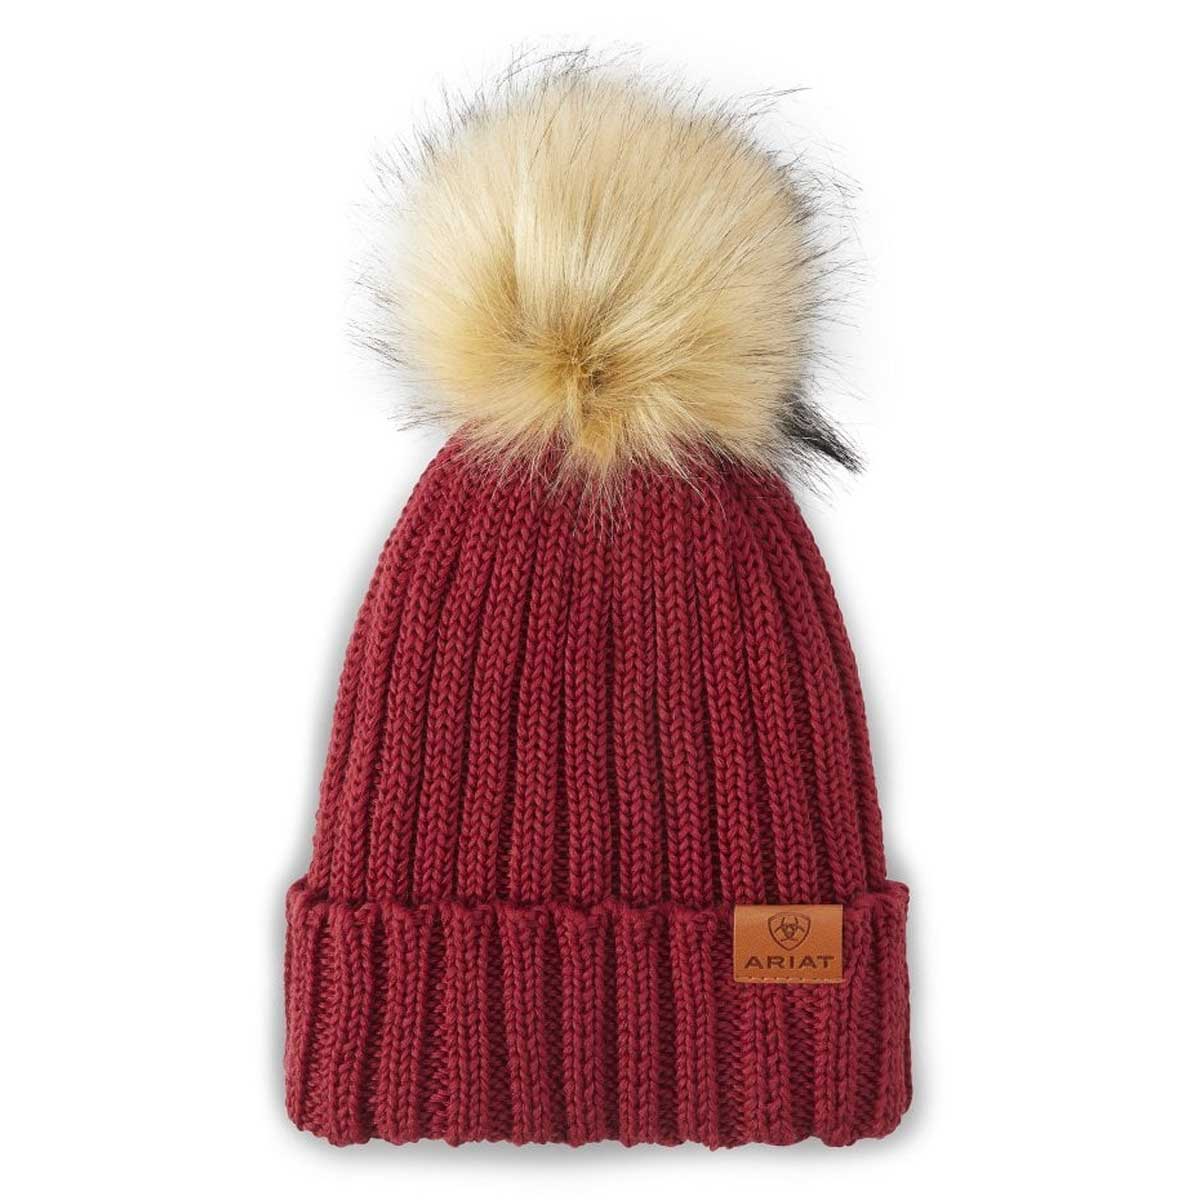 ARIAT Cotswold Beanie - Rhubarb